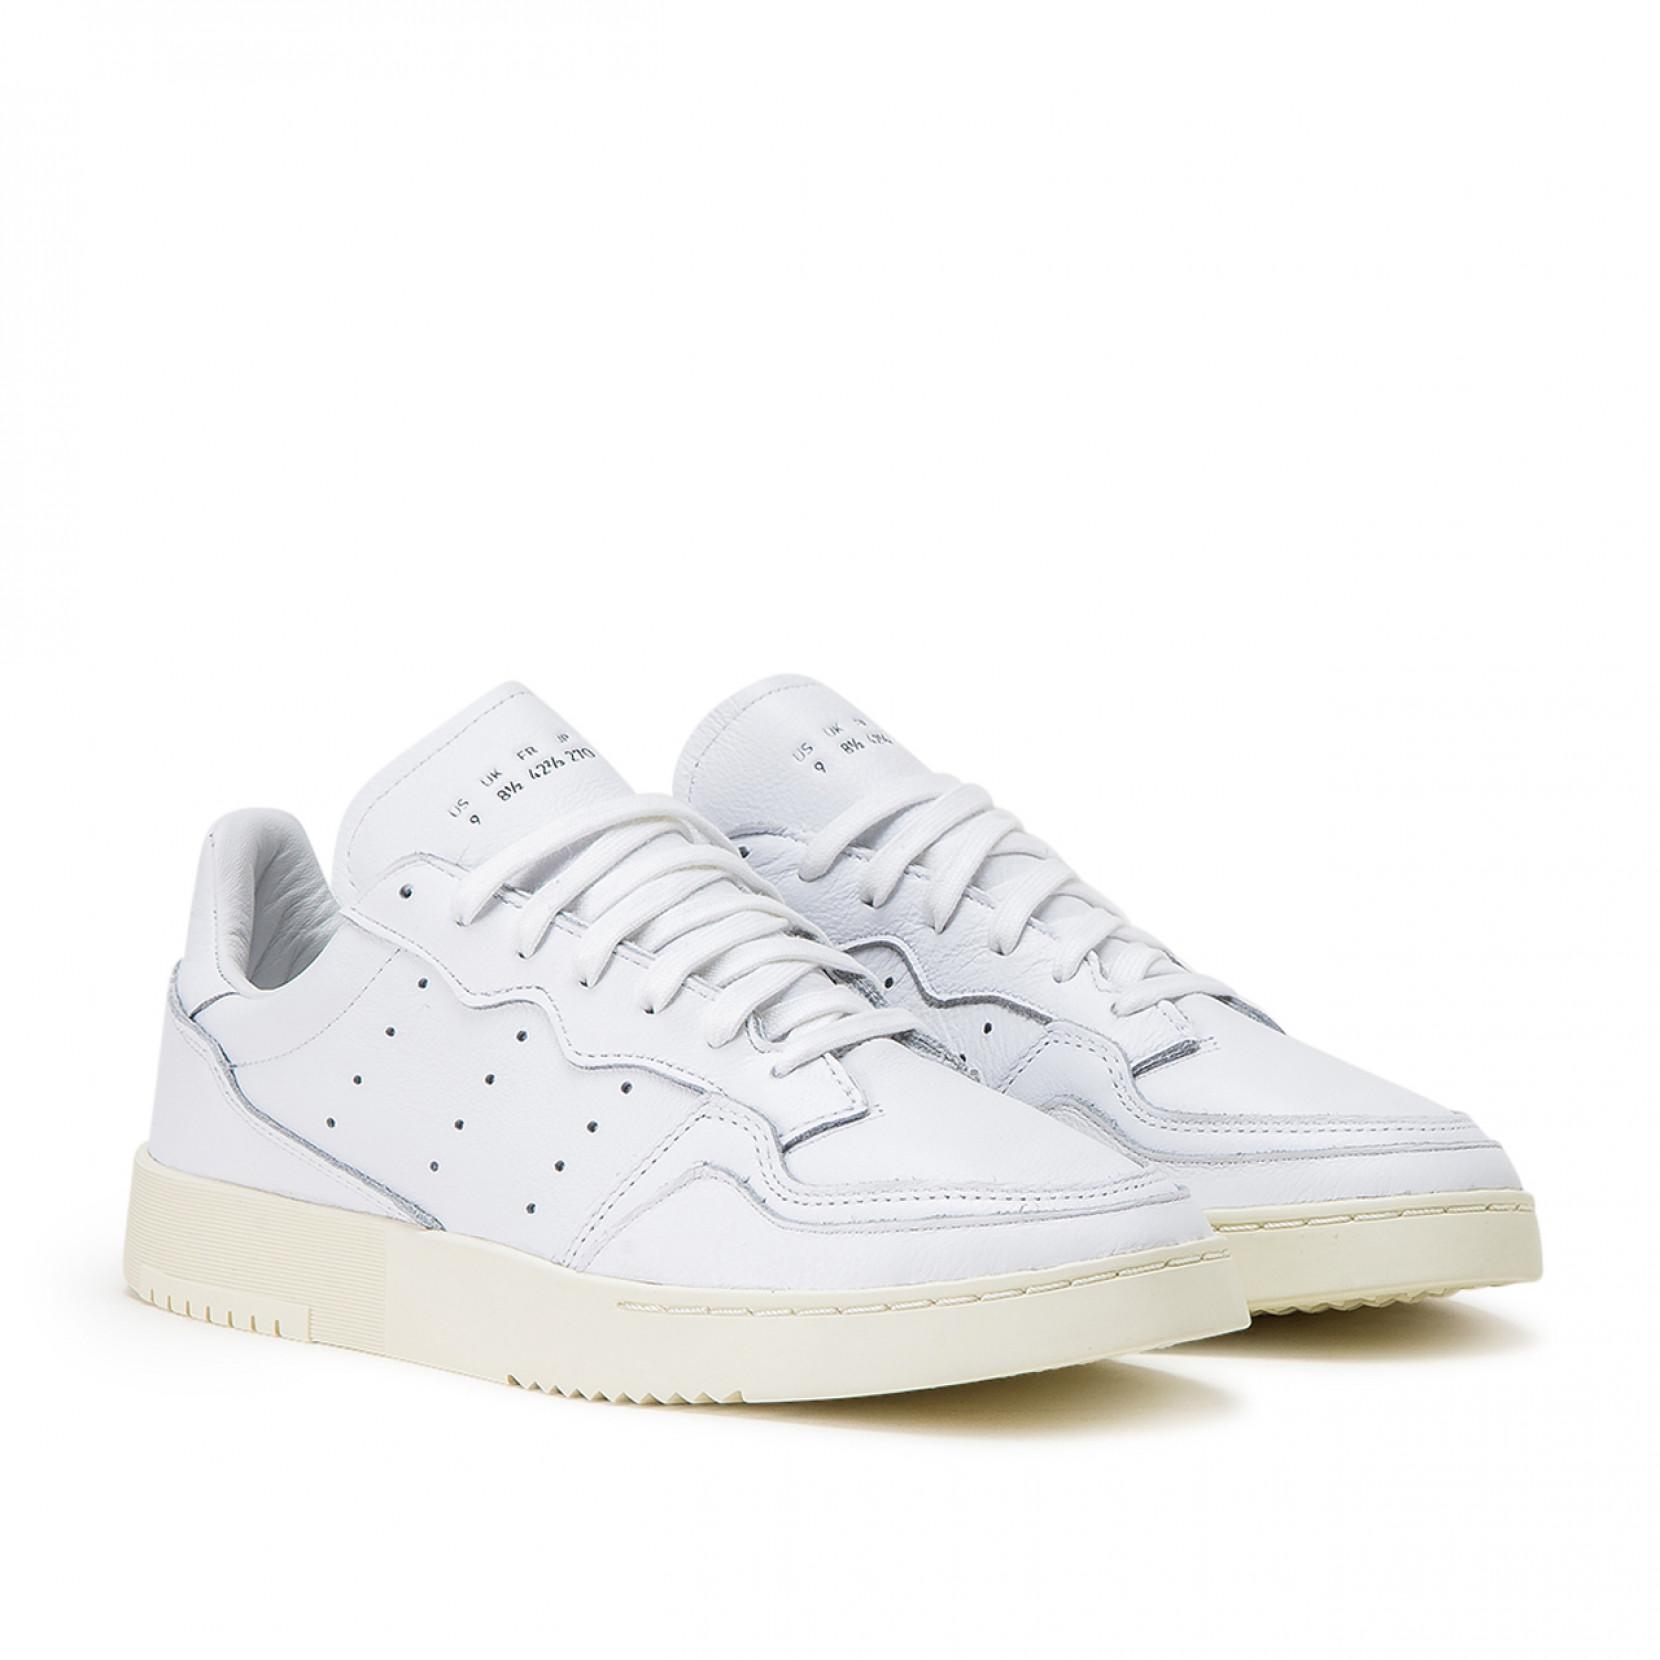 adidas Leather Supercourt "home Of Classics" in White for Men - Lyst